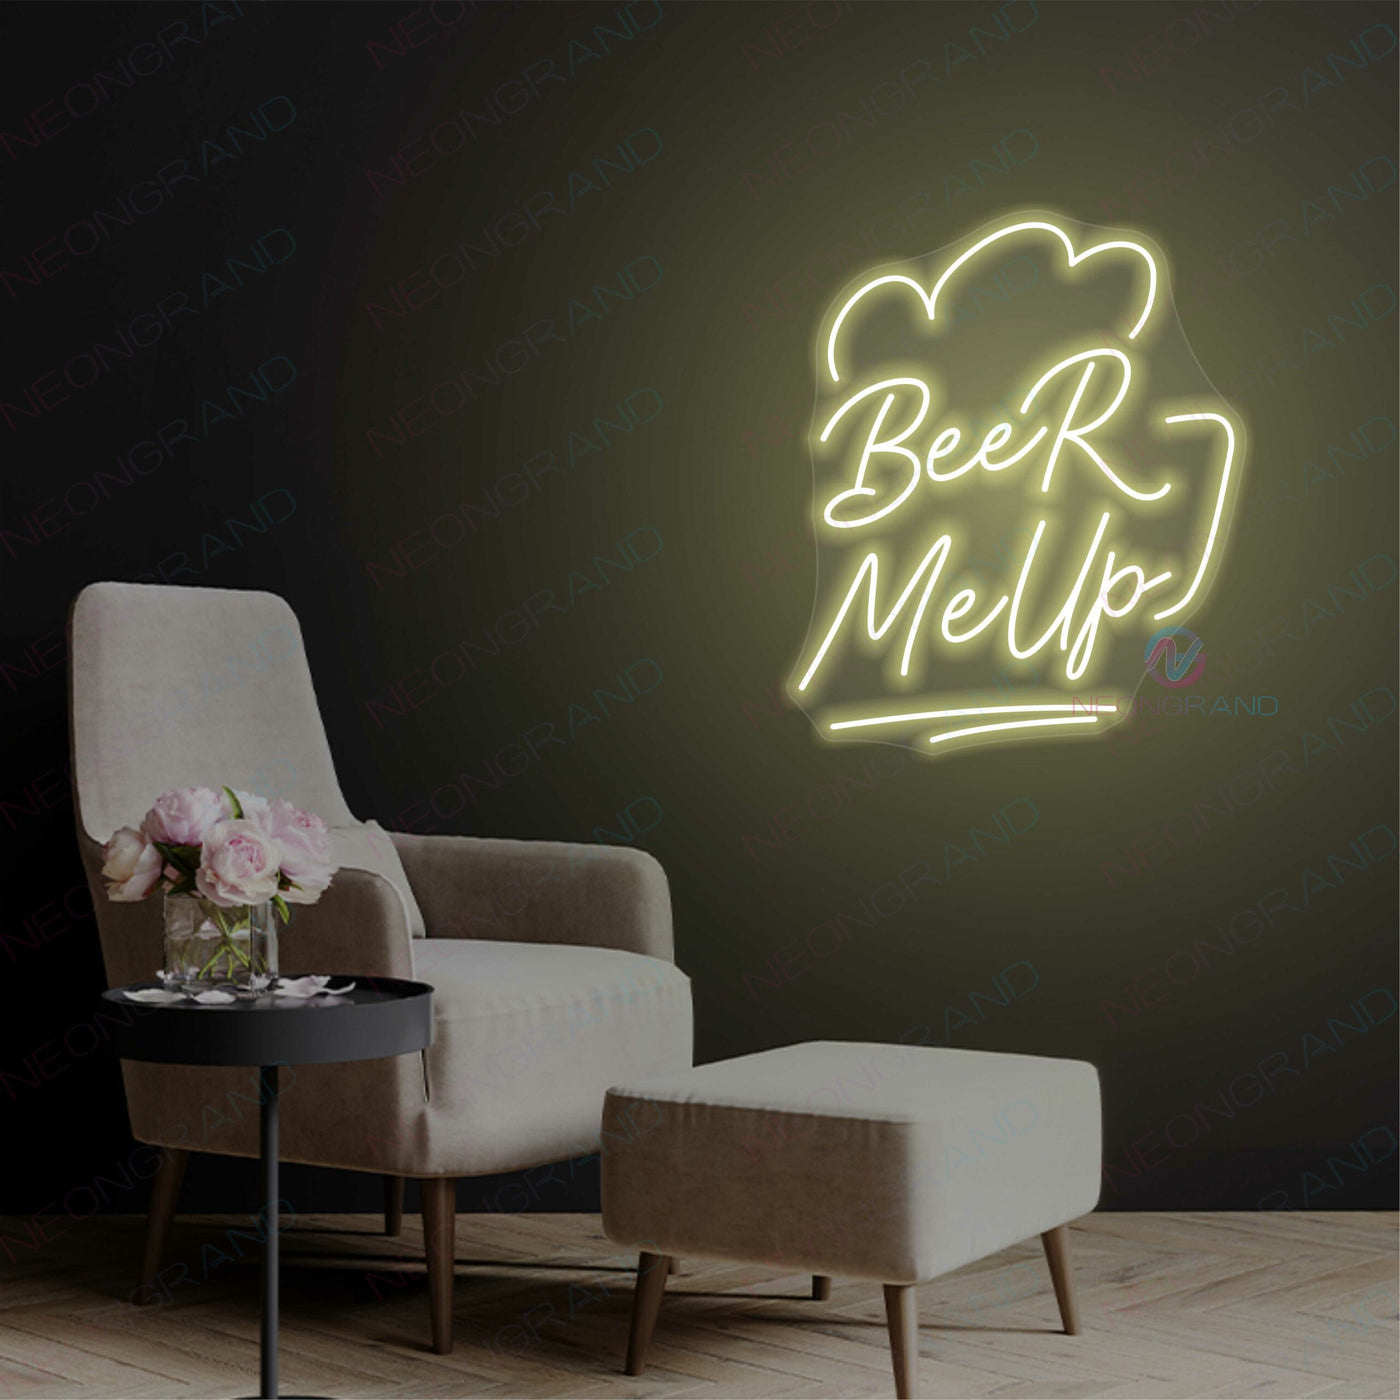 Beer Neon Sign Beer Me Up Drinking Led Light gold yellow